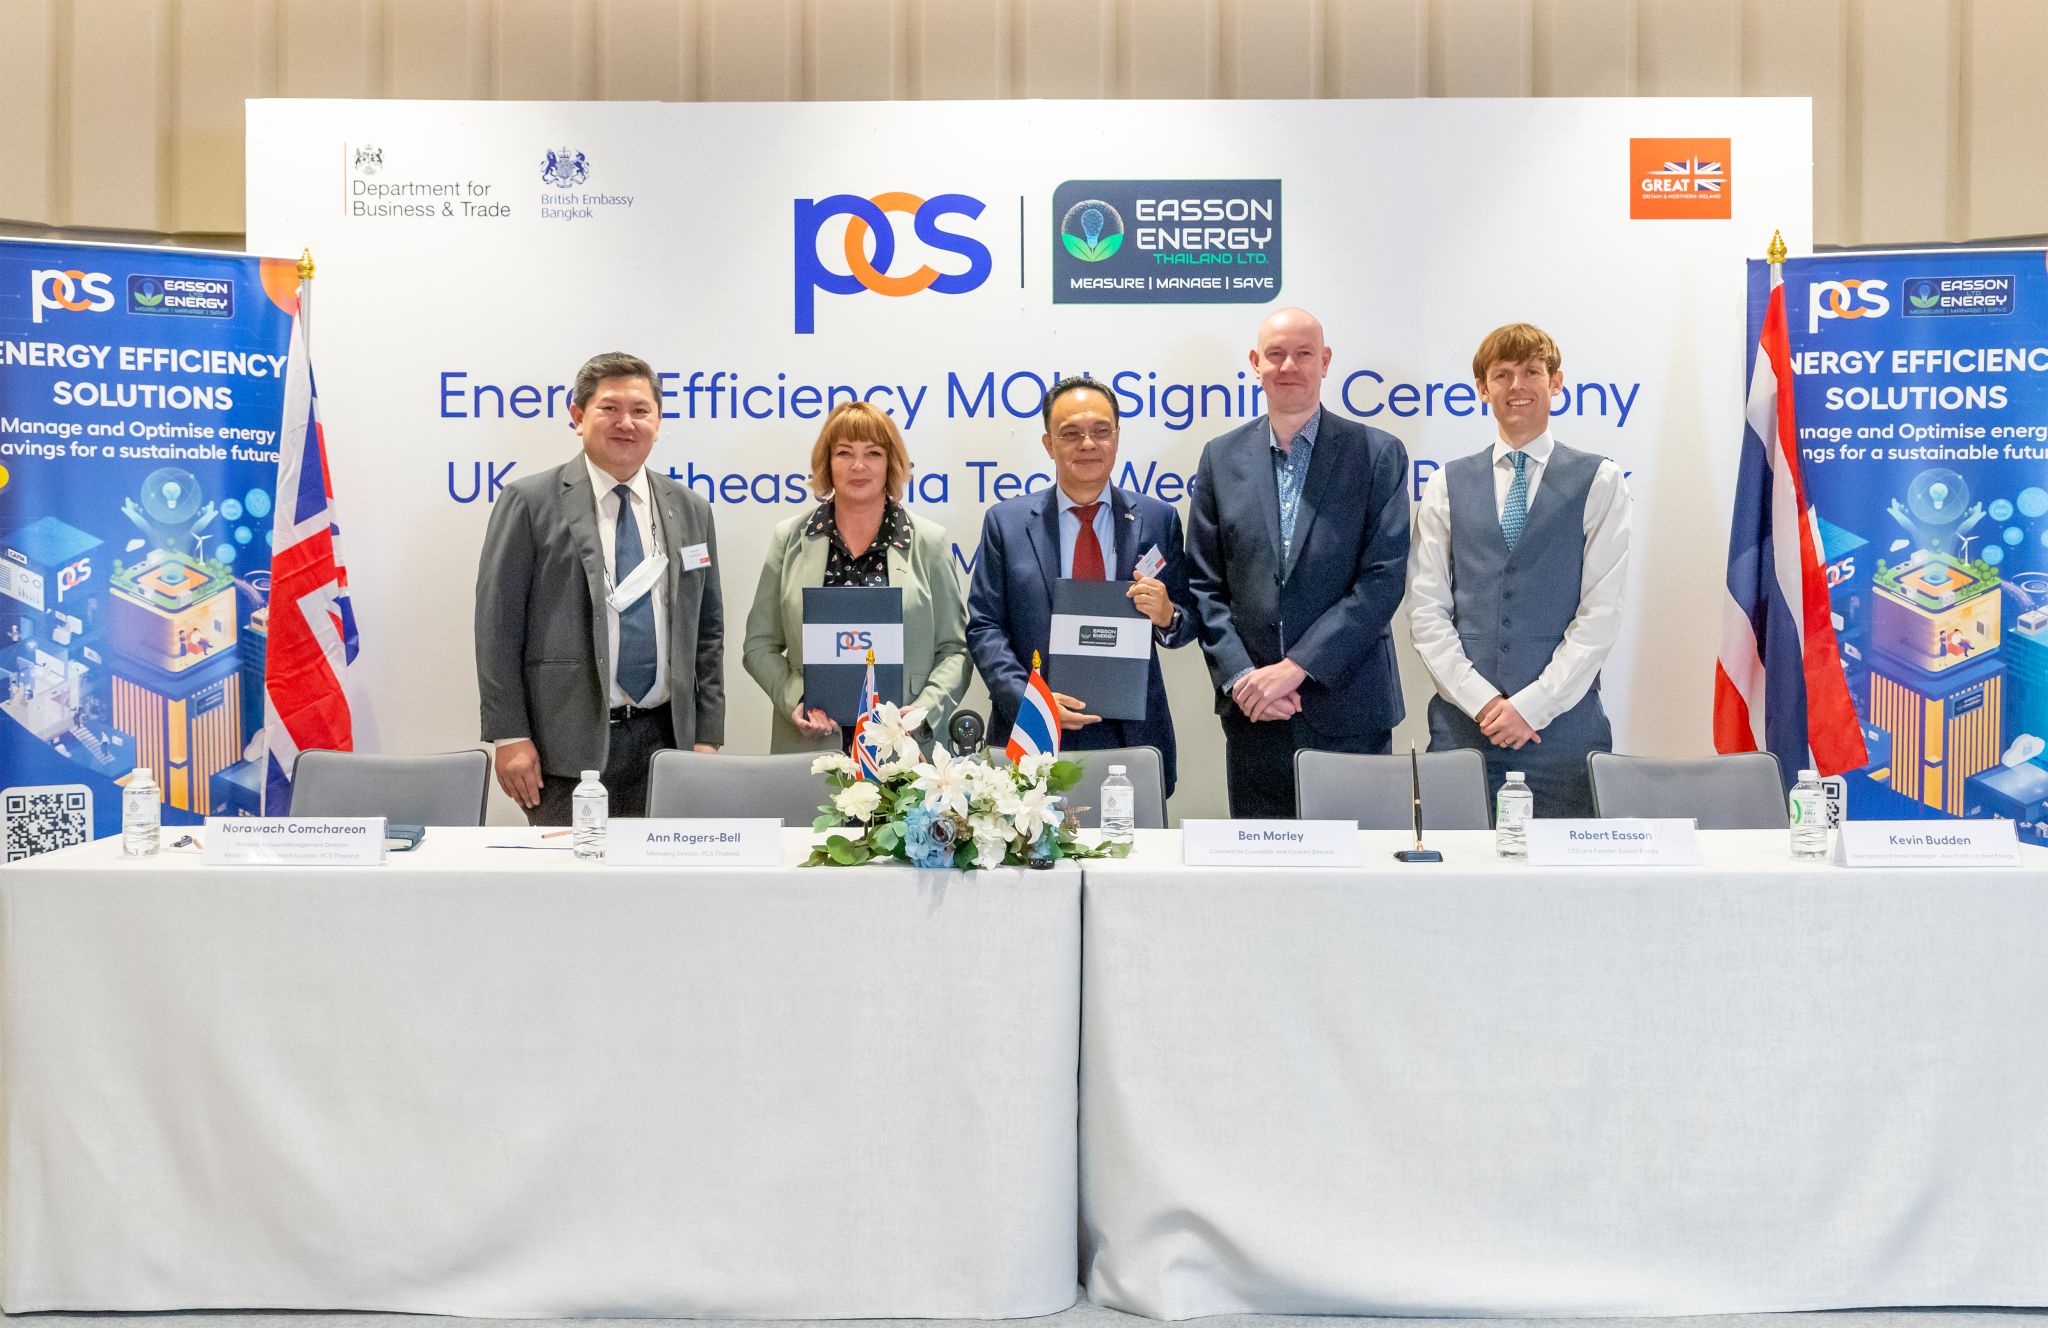 Easson Energy, PCS Thailand and Best.Energy Regional Sales Manager Kevin Budden signing a Memorandum of Understanding (MOU) on Energy Efficiency at UK-Southeast Asia Tech Week 2023, in Bangkok.